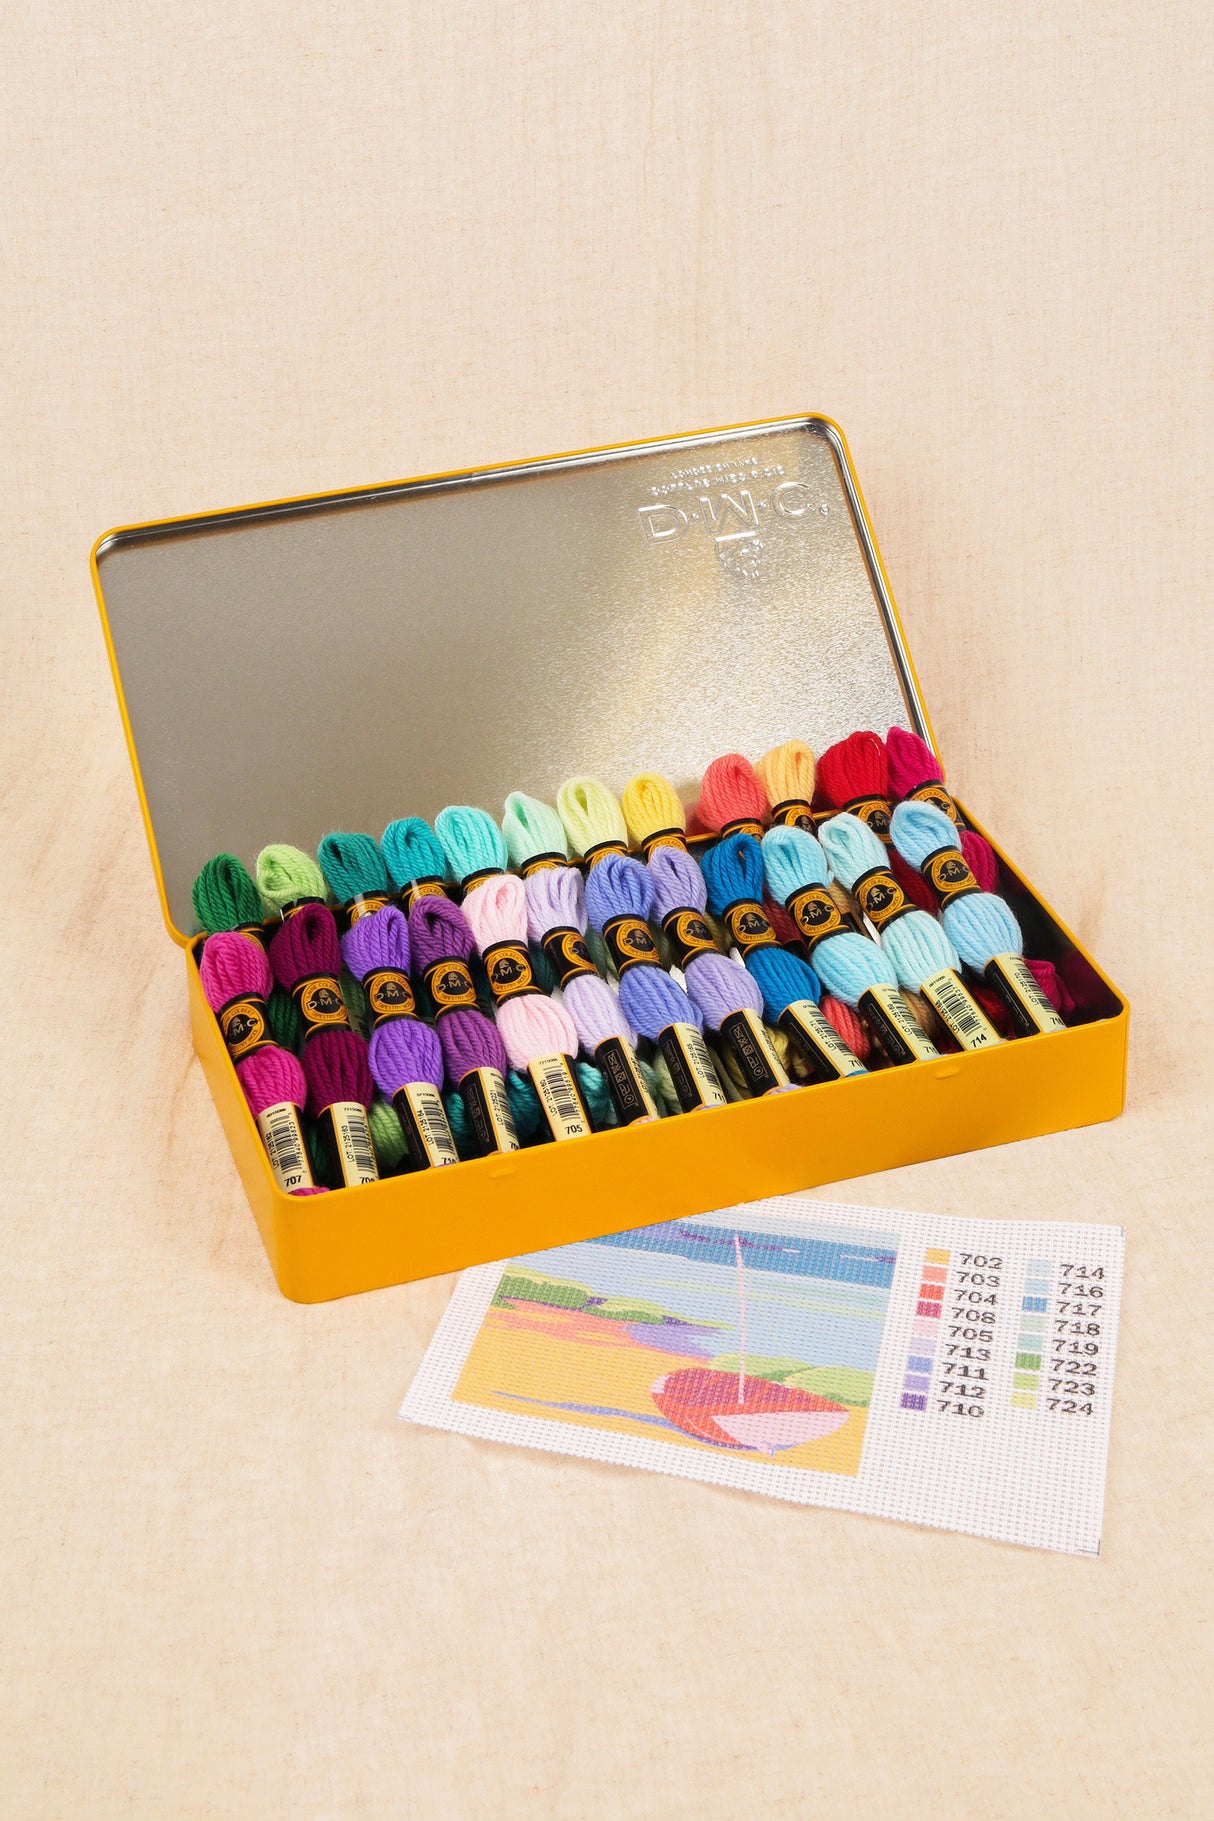 Metal Box with 24 Skeins of DMC Colbert Wool - Limited Edition: The Elegance of Embroidery 